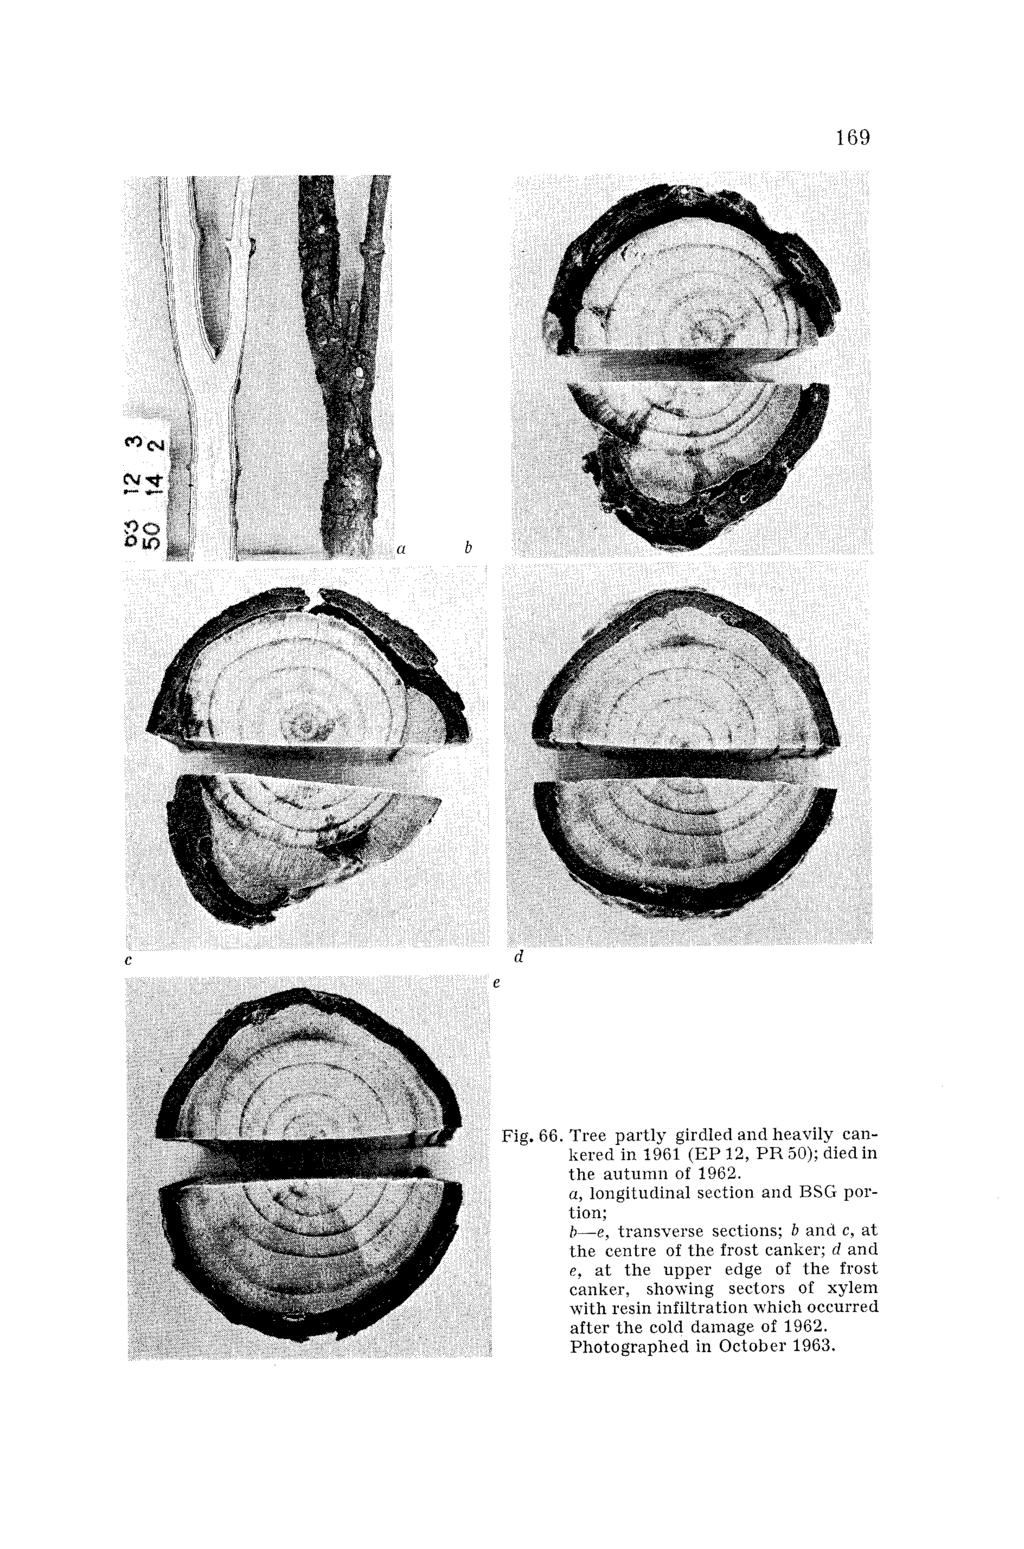 Fig. 66. Tree partly girdled and heavily cankered in 1961 (EP 12, PR 50); died in the autumn of 1962.